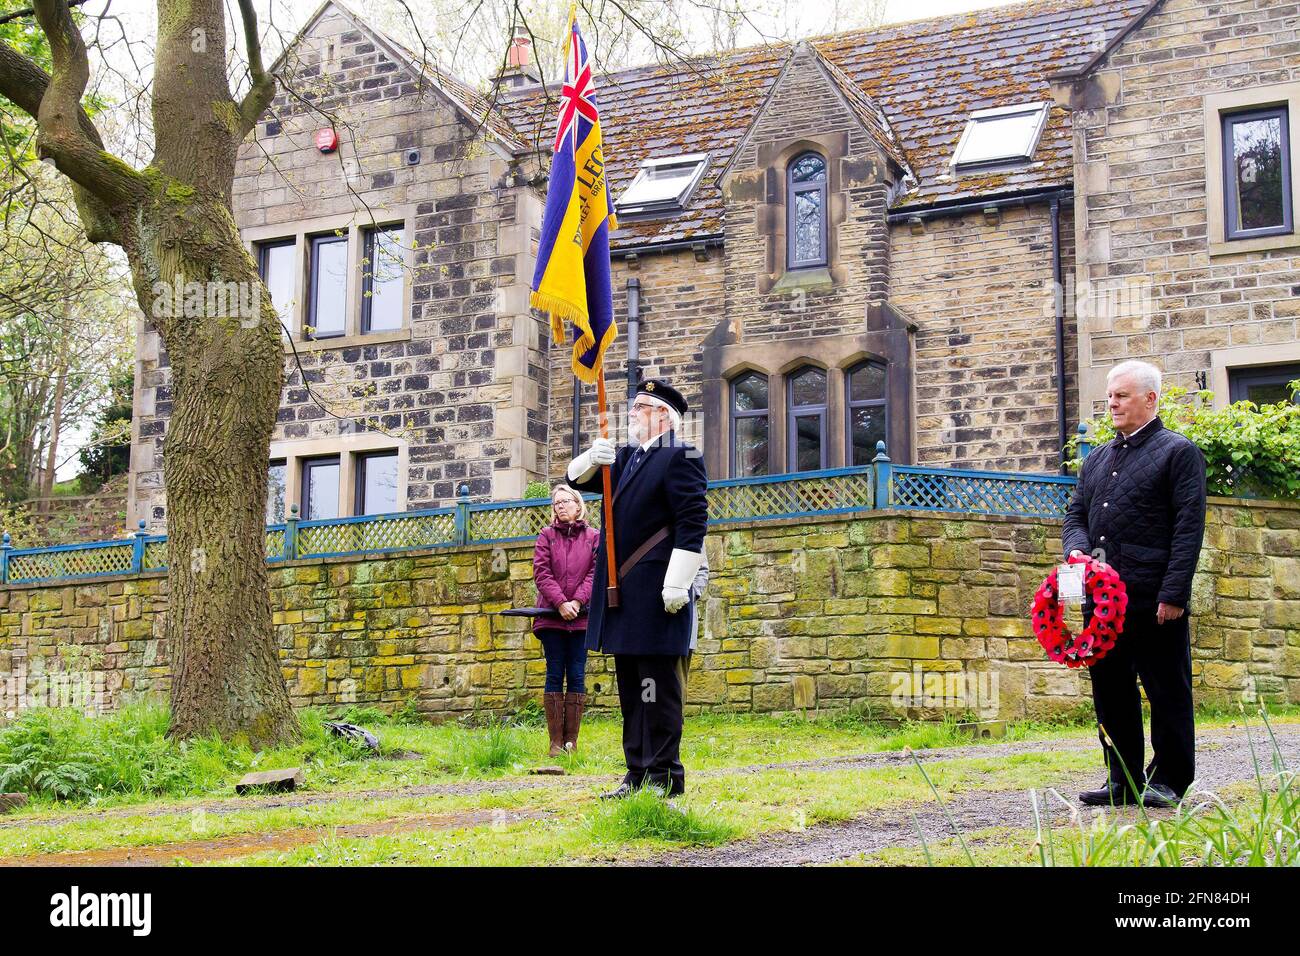 Honley, Holmfirth, UK 15 May 2021. At 11.00 am the committee and members of the Royal British Legion Honley laid a wreath at the Honley War Memorial in Remembrance of the Royal British Legion Centenary. RASQ Photography/Alamy Live News Stock Photo